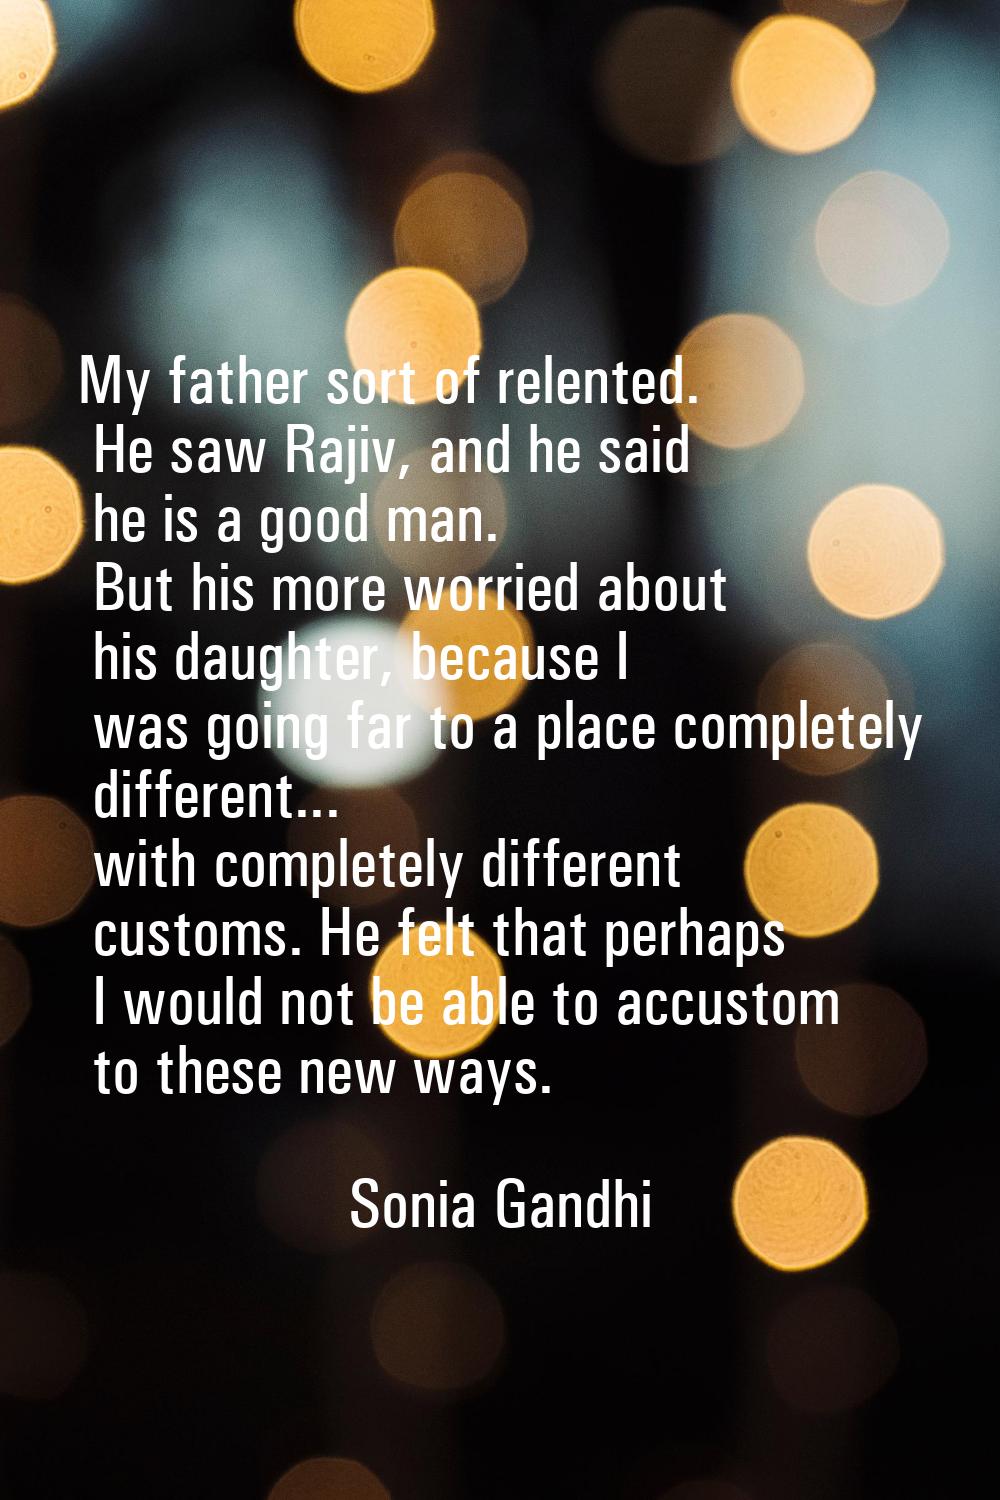 My father sort of relented. He saw Rajiv, and he said he is a good man. But his more worried about 